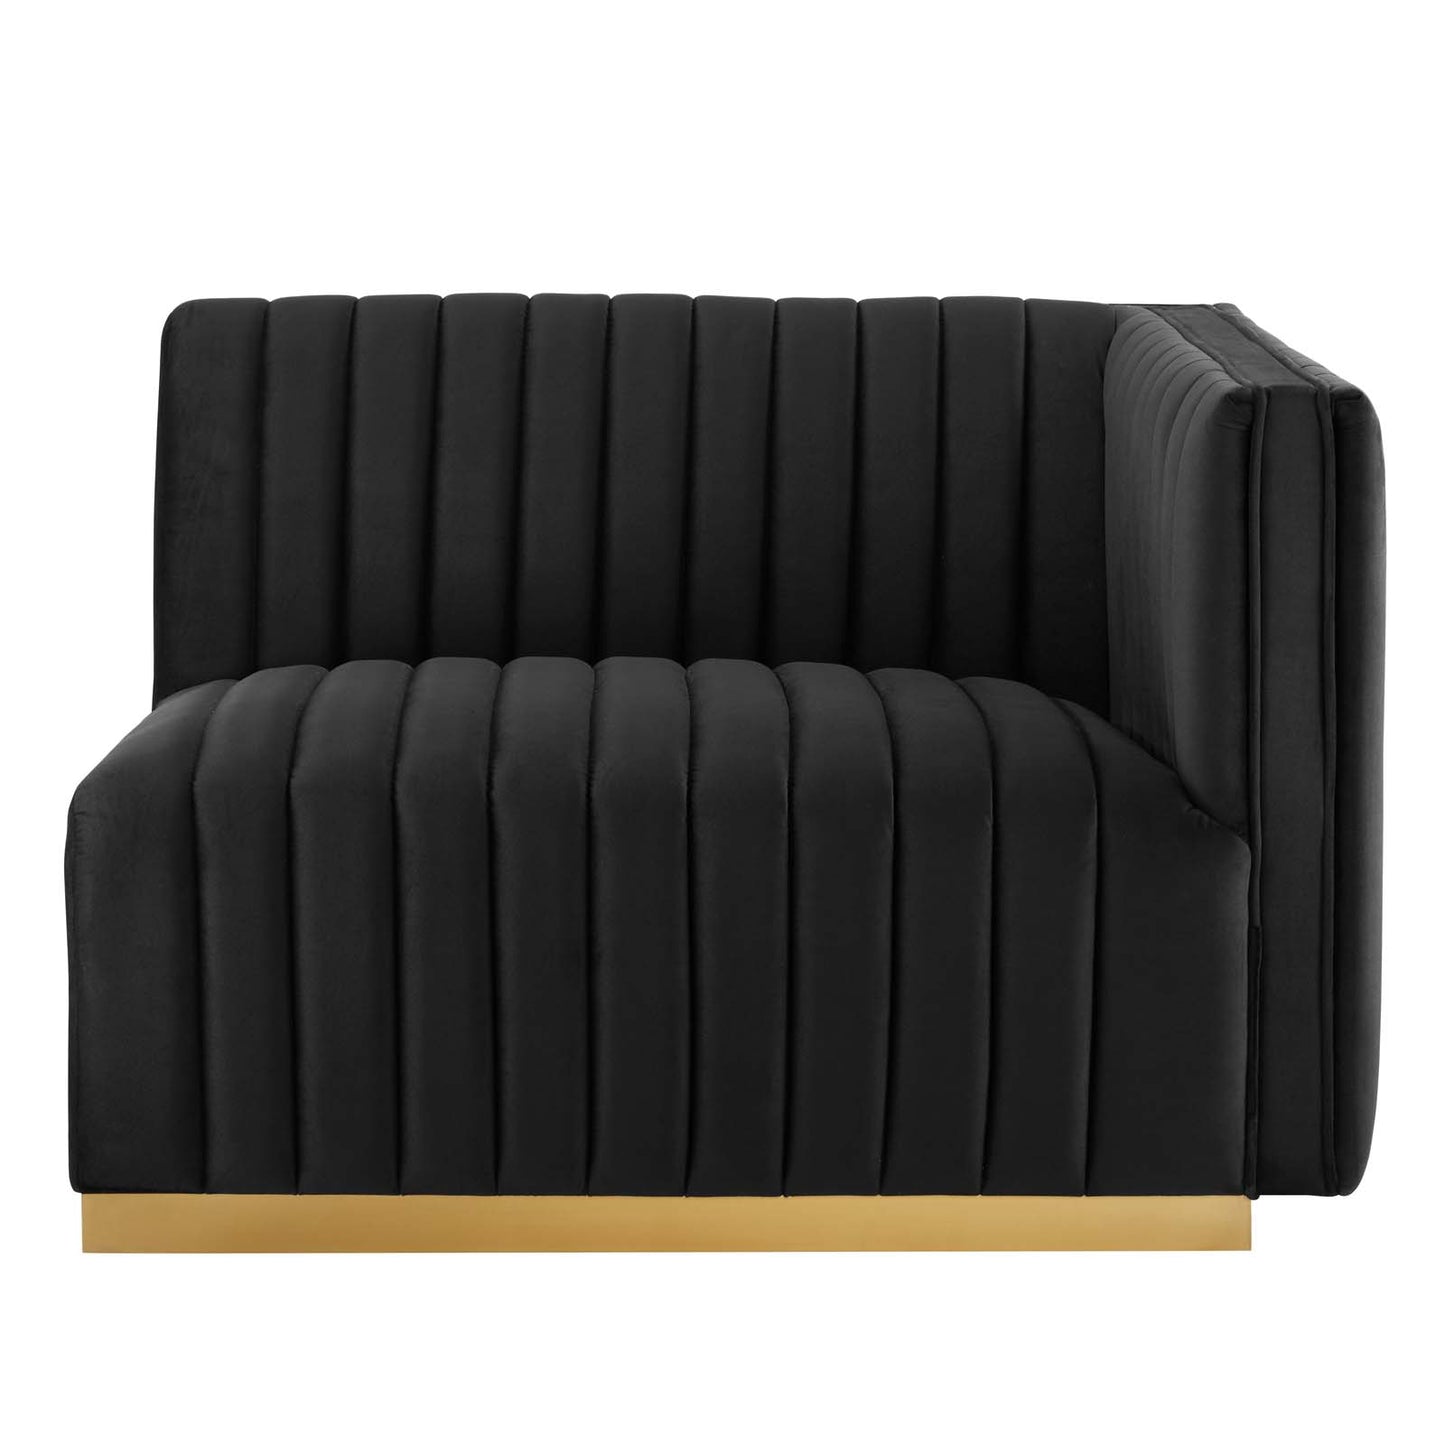 Conjure Channel Tufted Performance Velvet Right-Arm Chair Gold Black EEI-5503-GLD-BLK